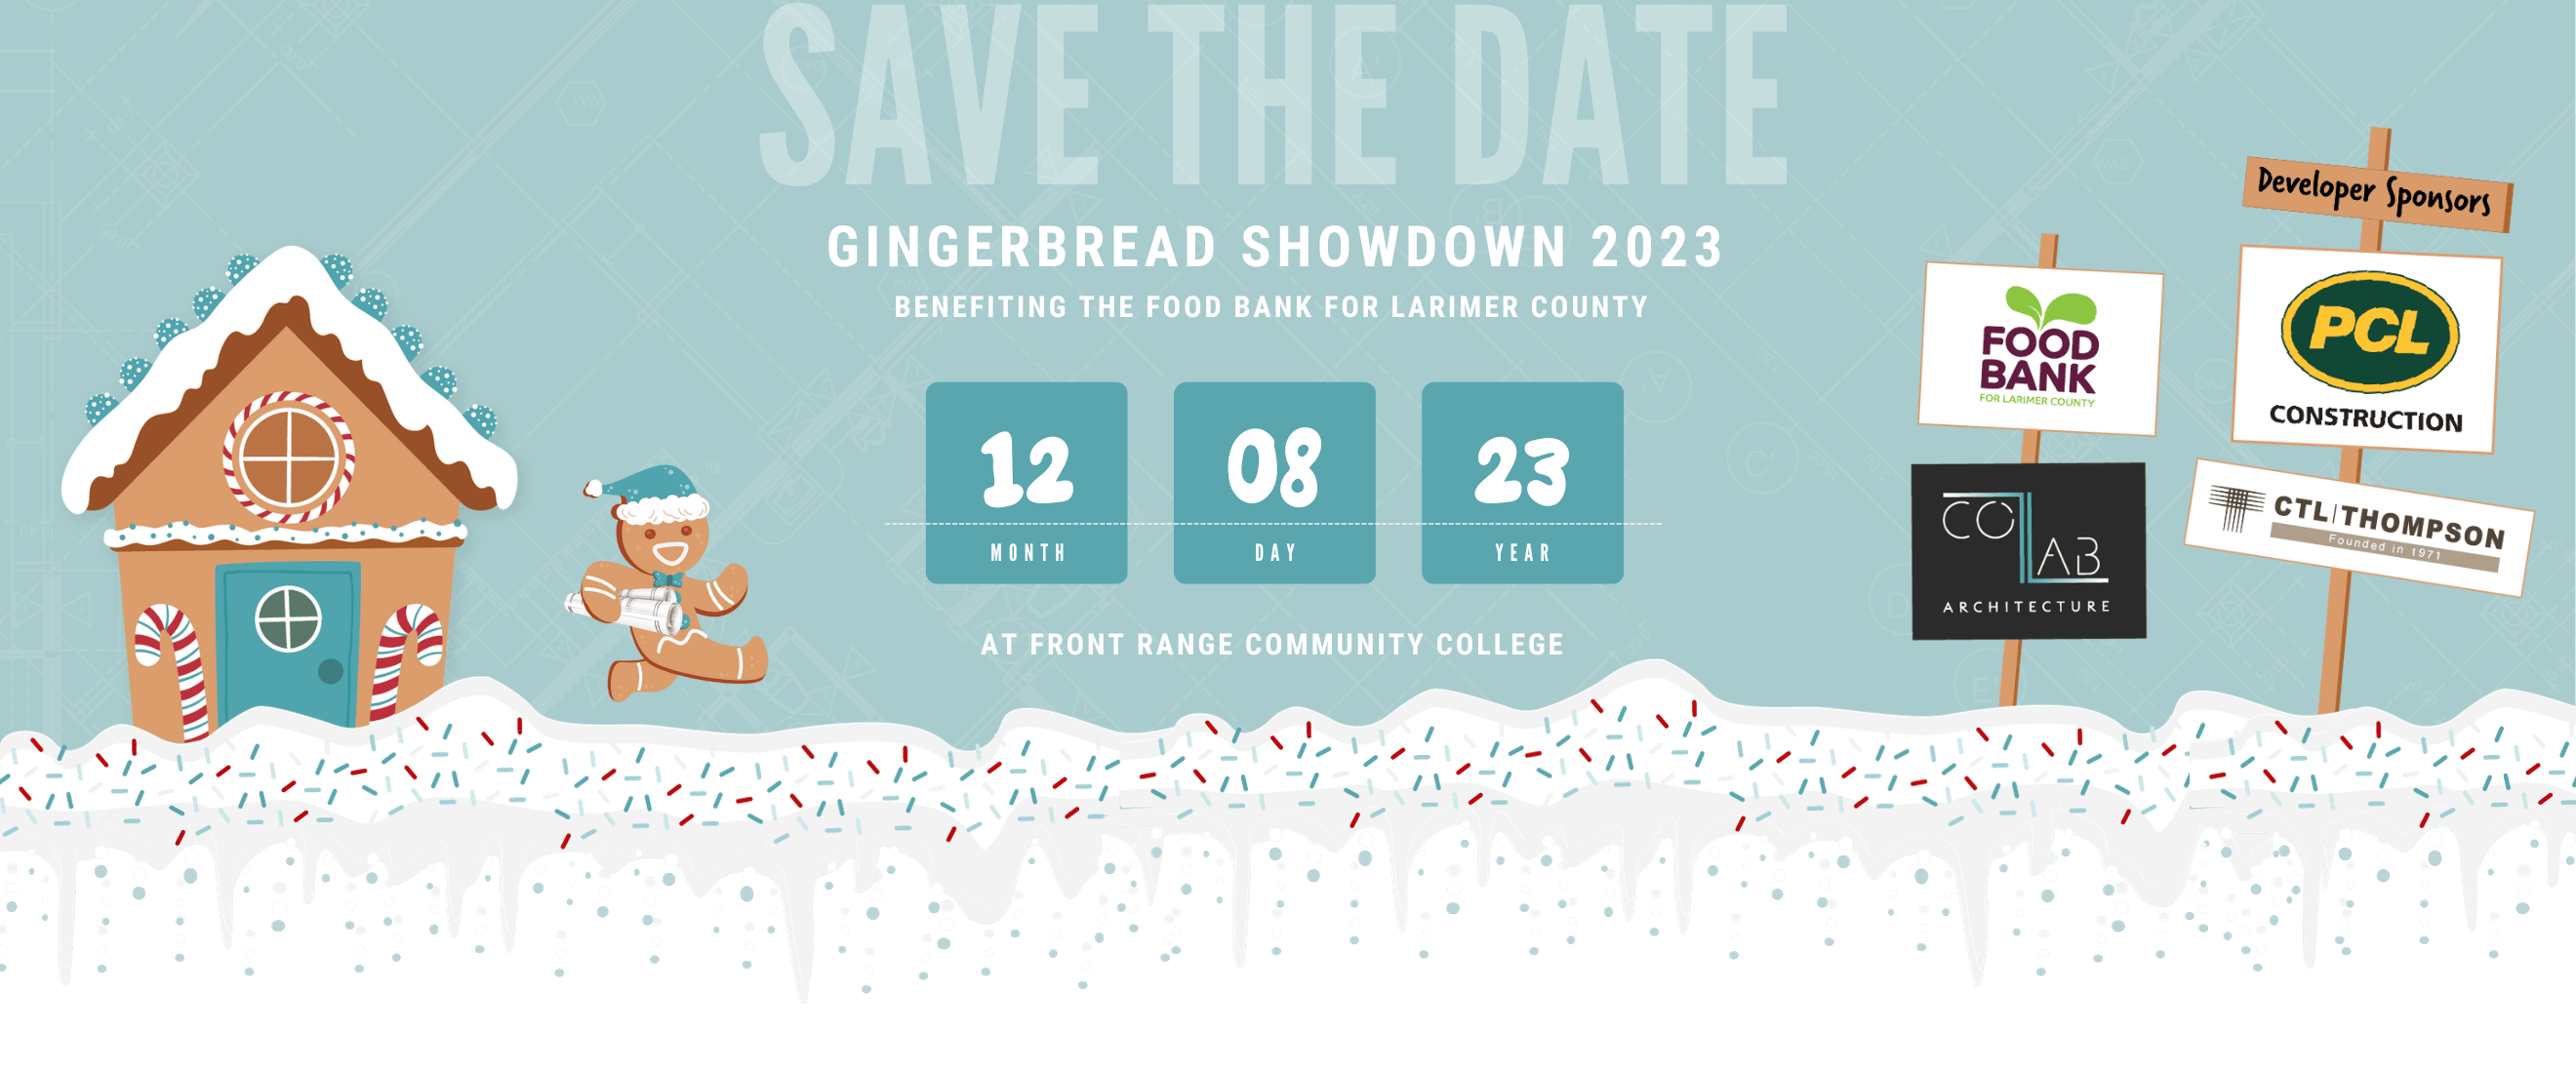 Save the Date Image for 2023 Gingerbread Showdown benefiting the Food Bank of Larimer County